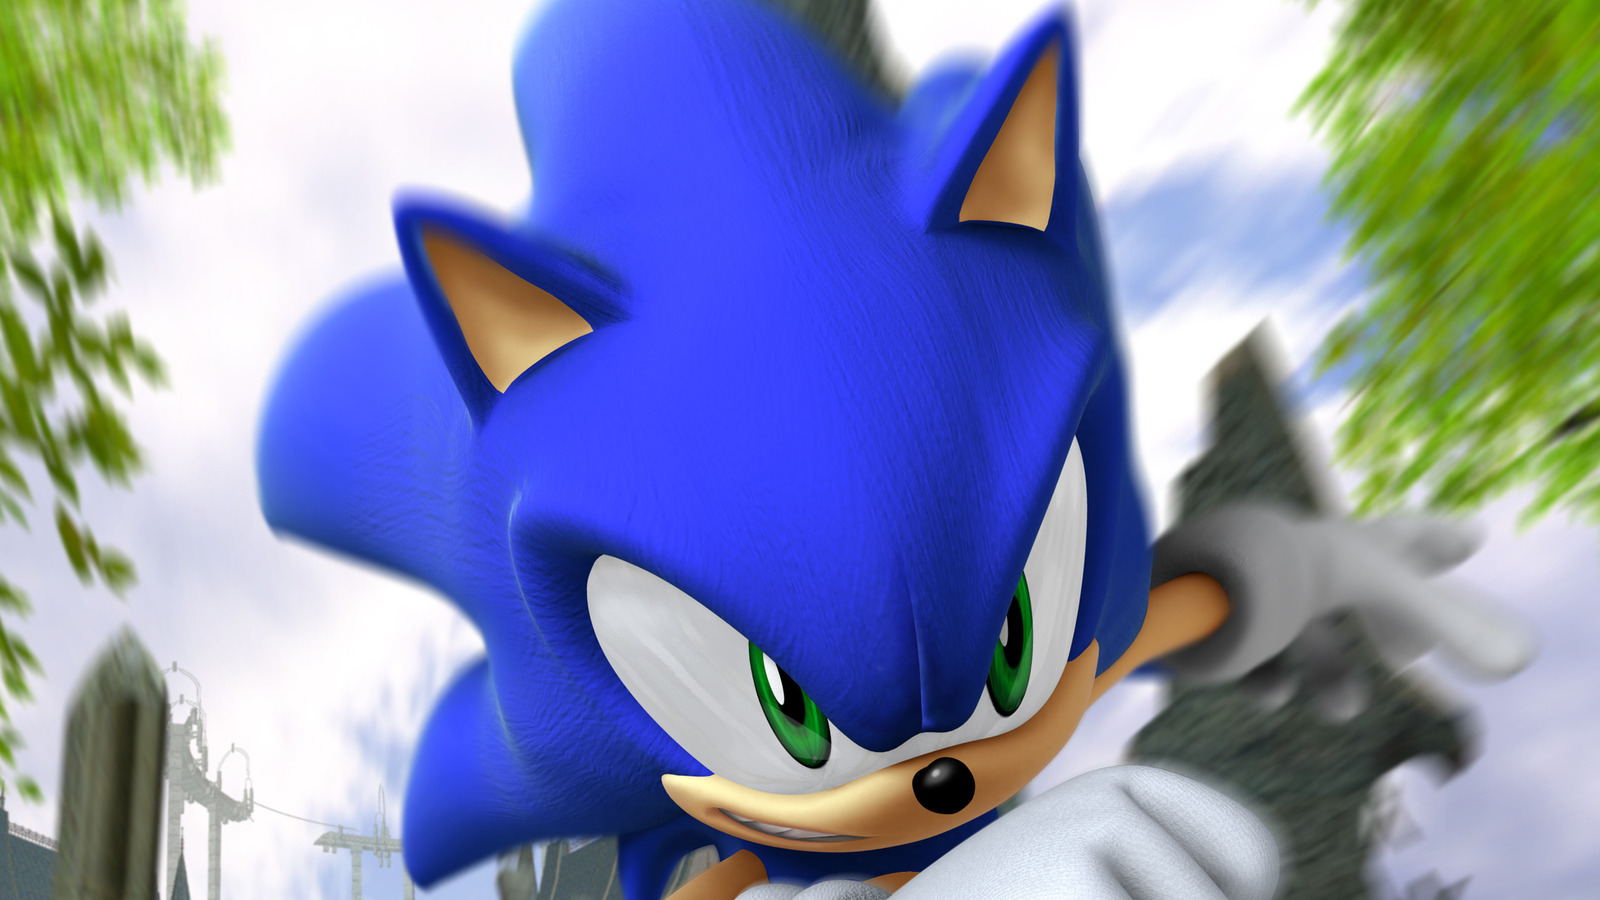 Sonic Boom announced, but just what has Sega done to Knuckles